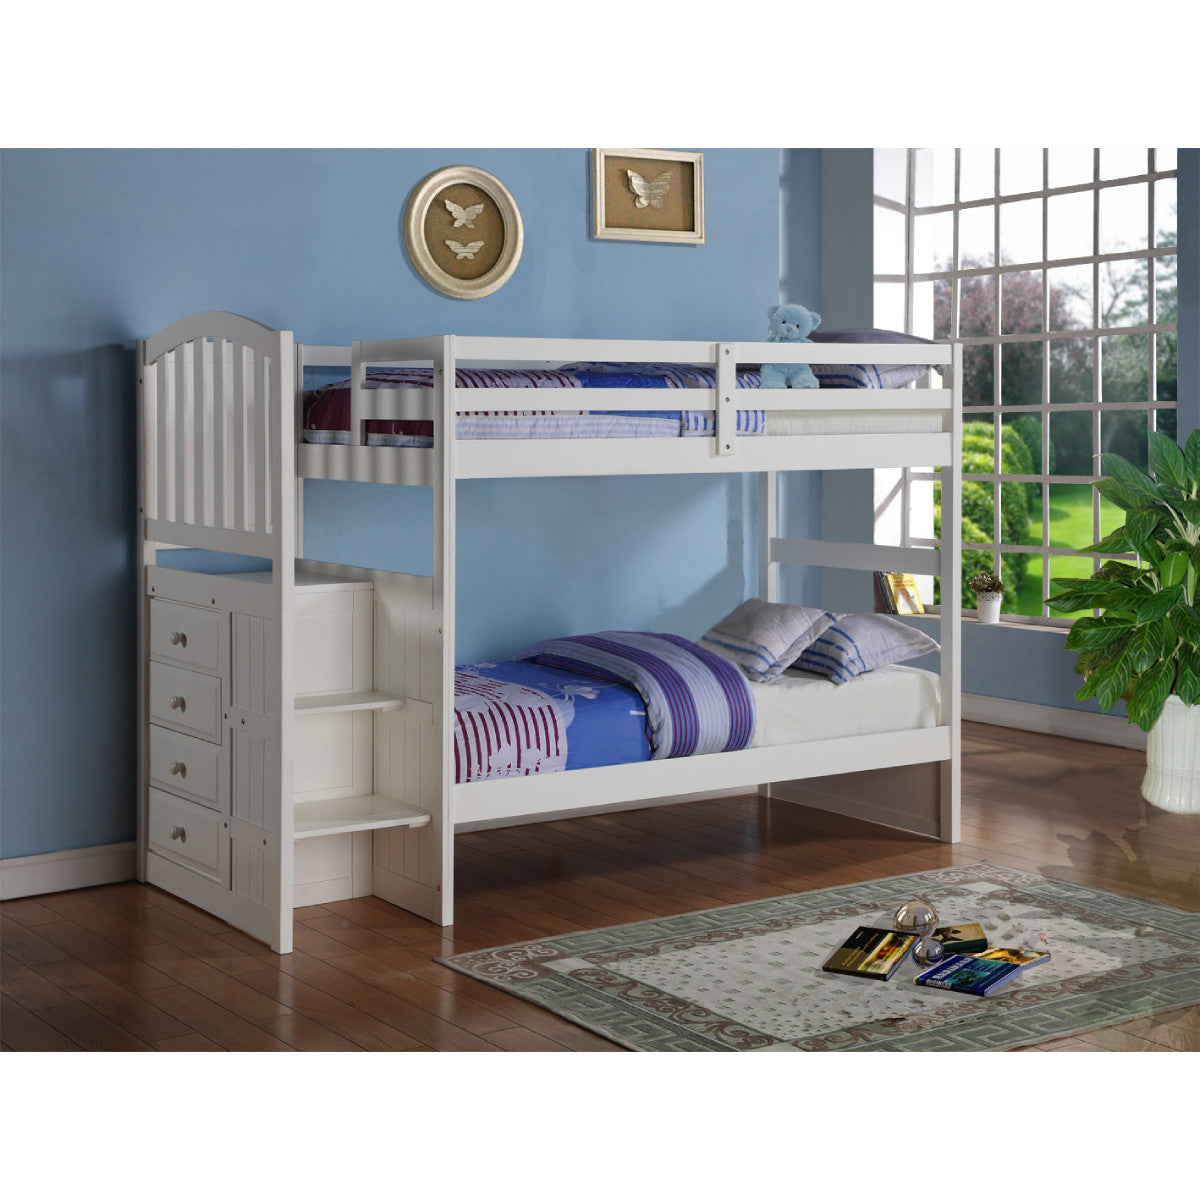 ARCH MISSION STAIRWAY BUNKBED WHITE